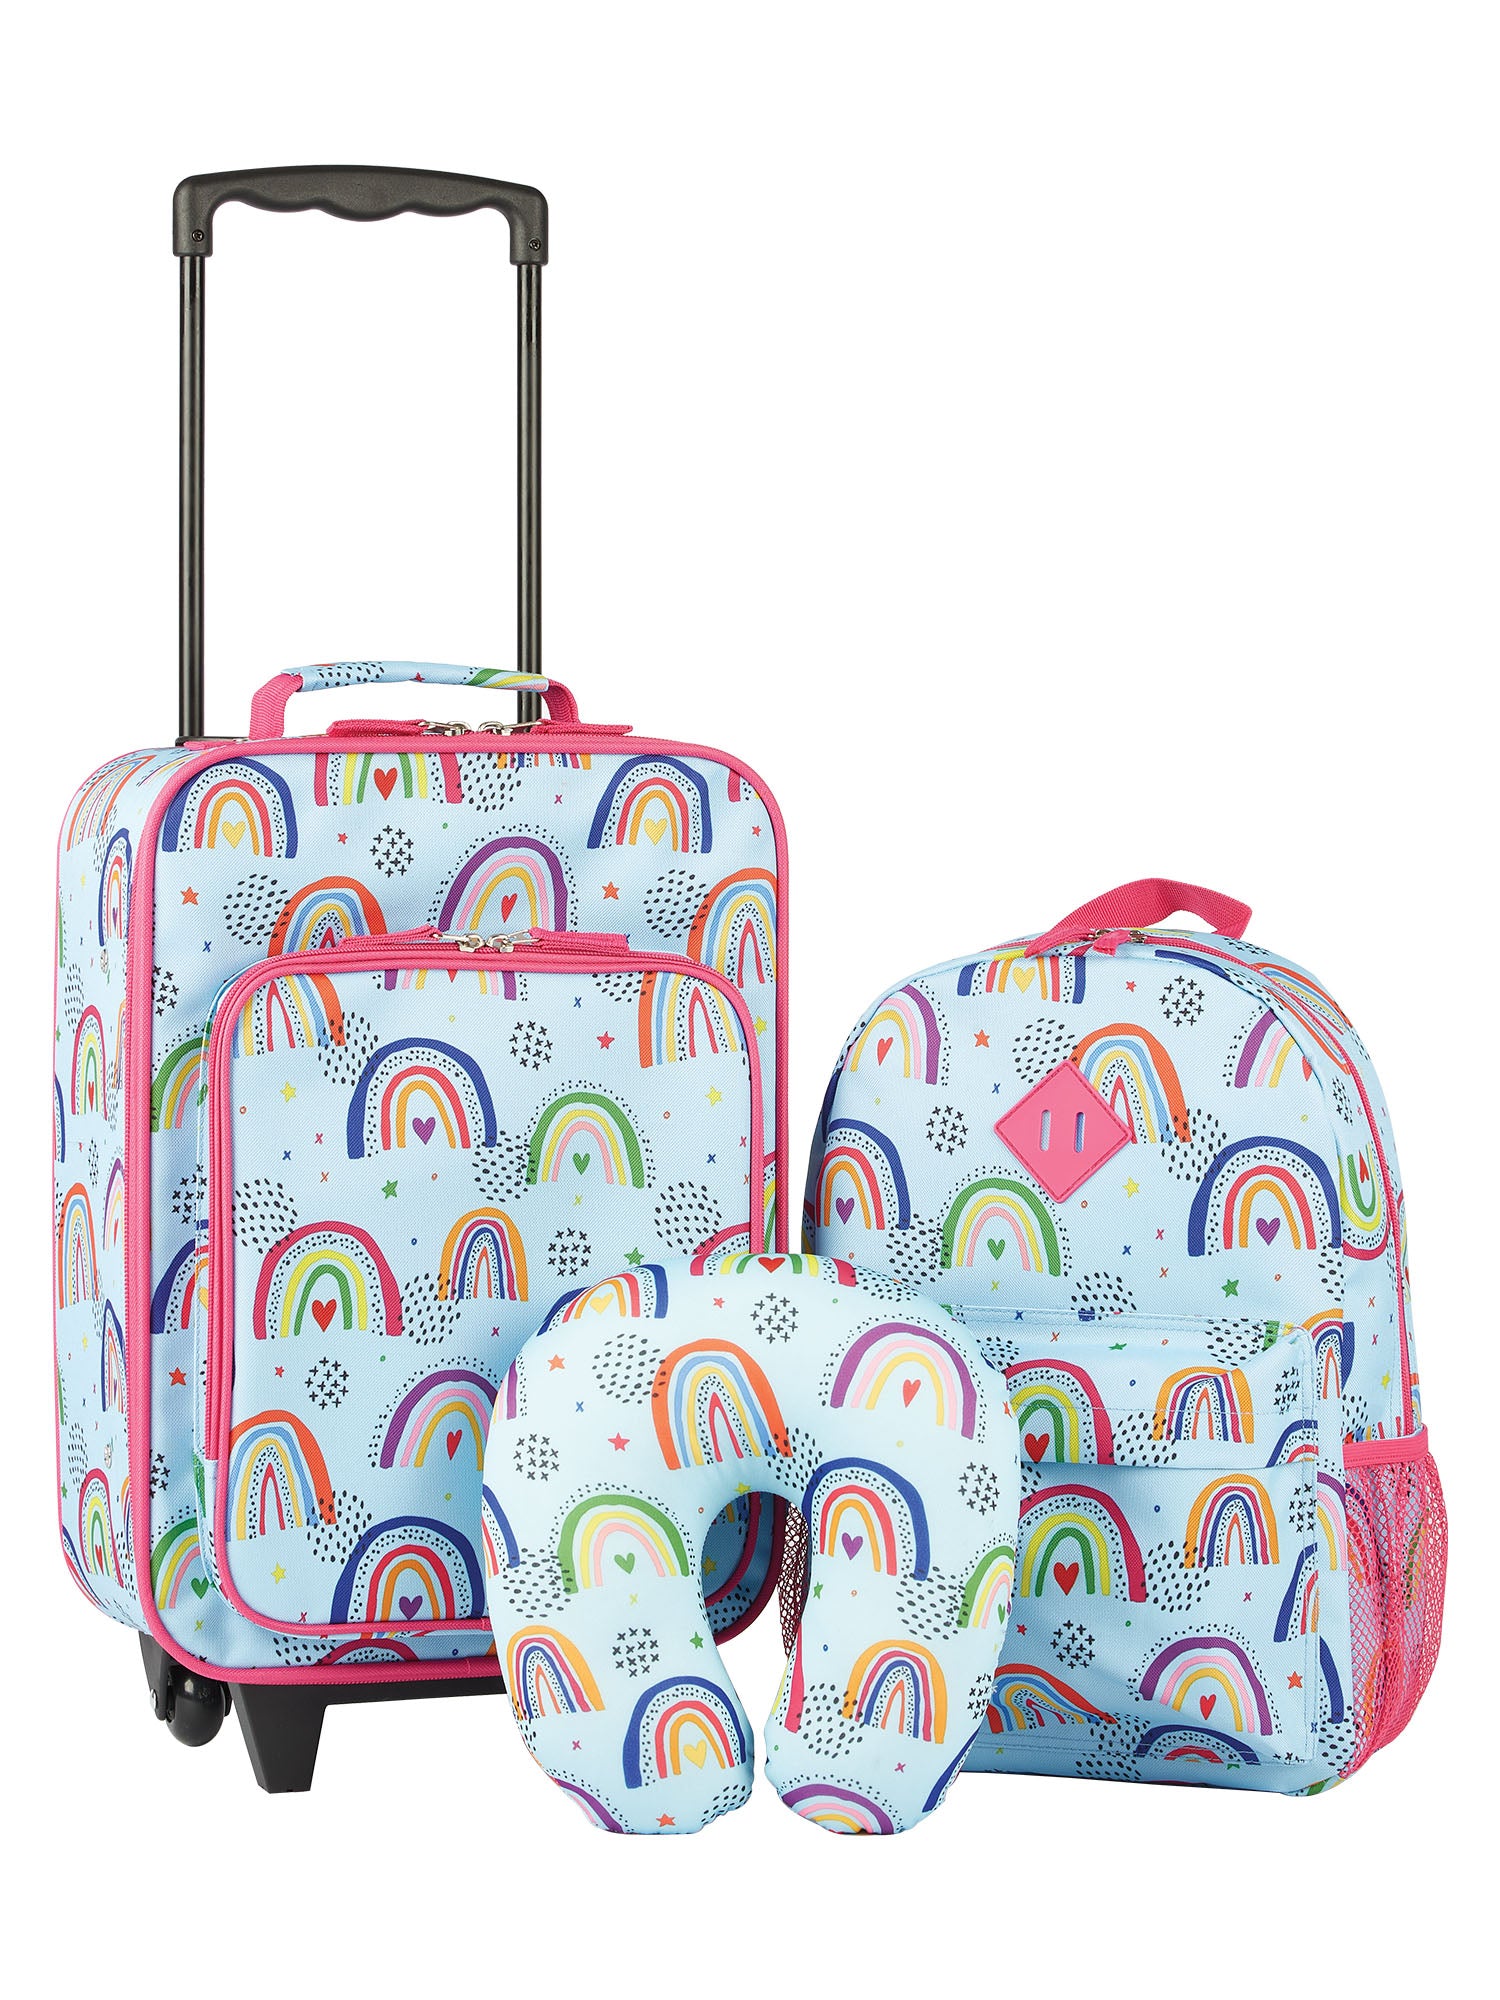 16 Inch Travel Luggage Suitcase for girls carry-on Rolling Suitcase for  boys Rainbow Kids trolley bags Soft Wheeled Suitcase